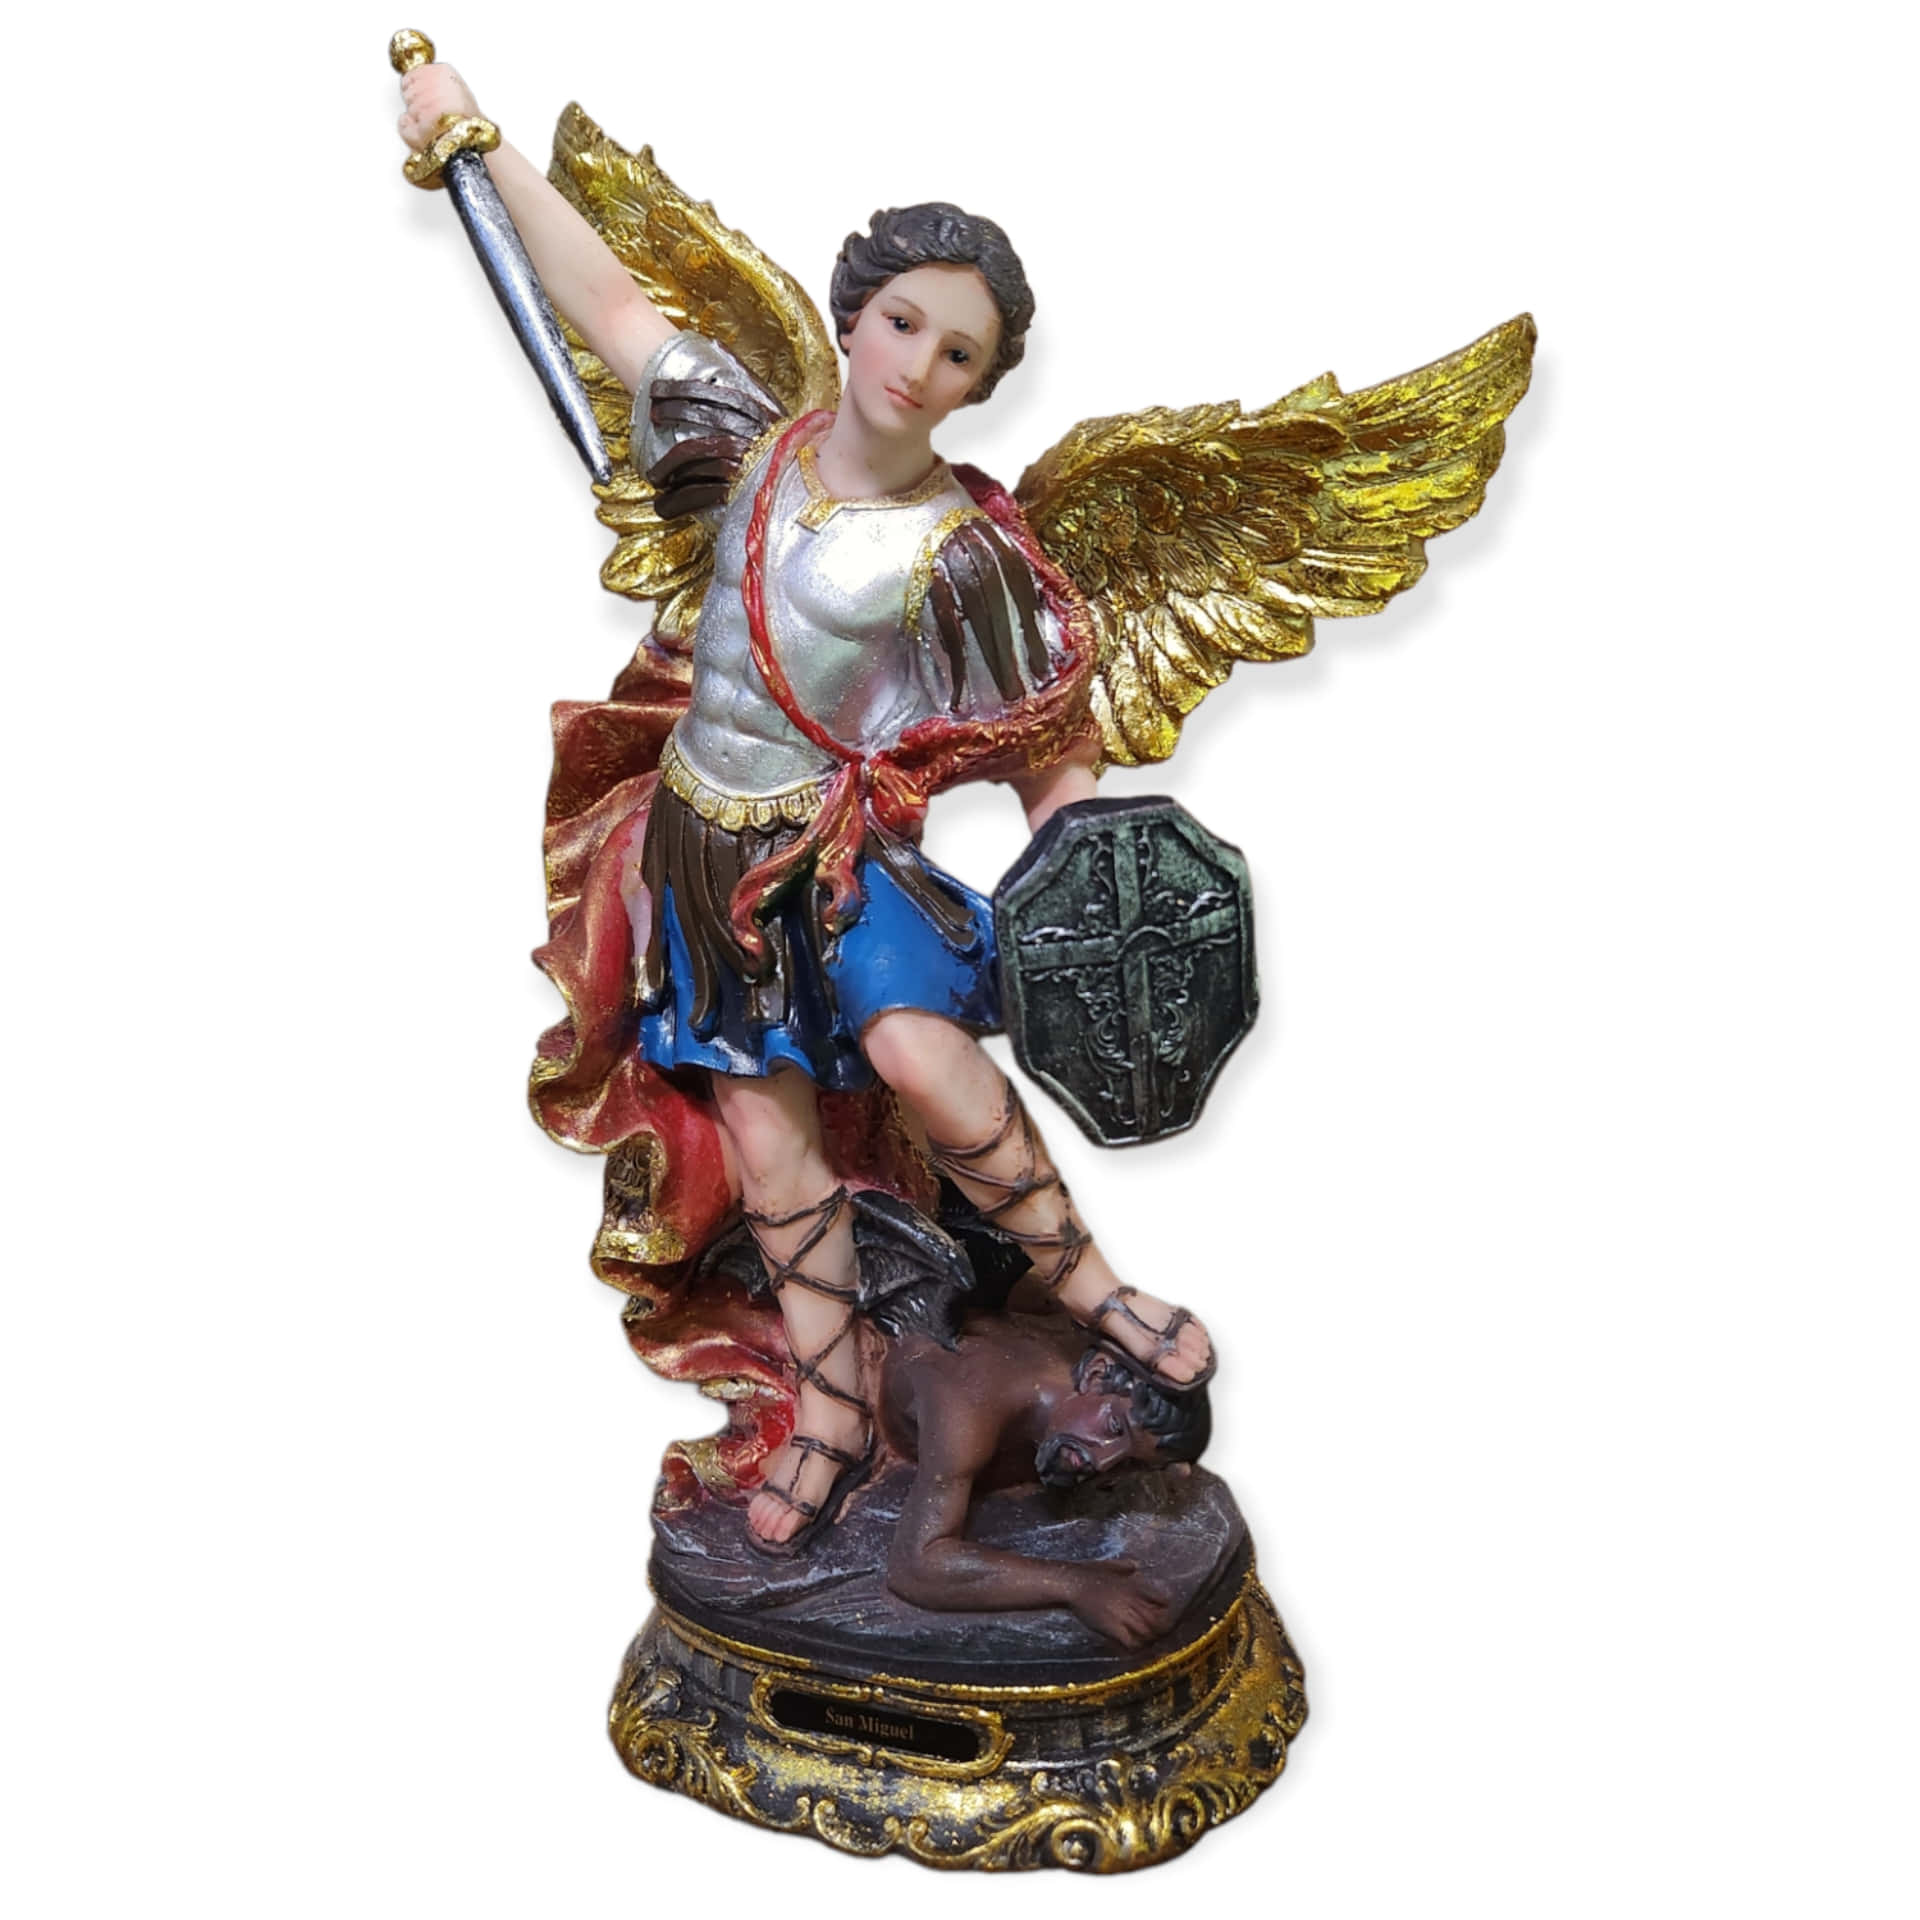 A Statue Of An Angel Holding A Sword